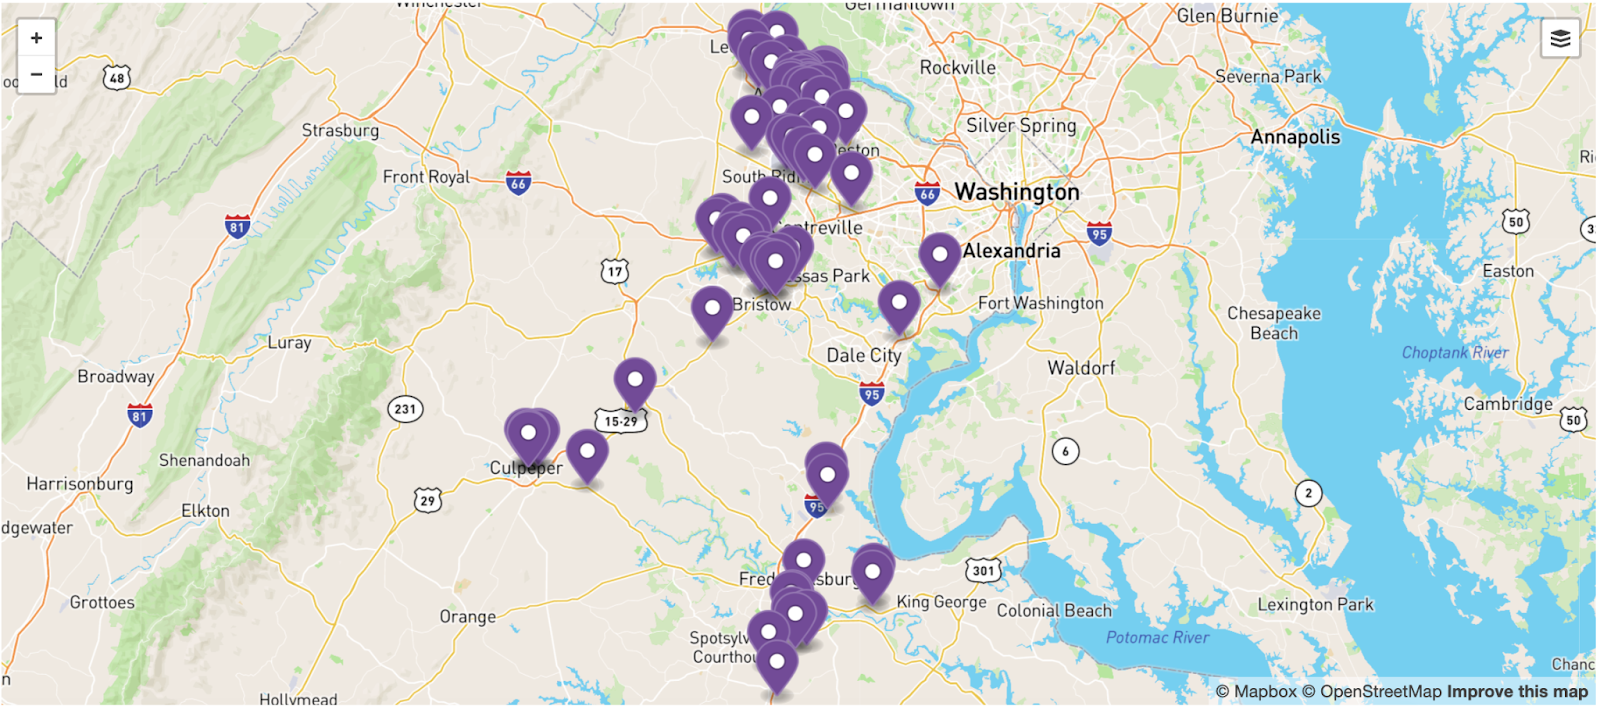 Upcoming data centers in the Northern Virginia region viewed through Yes Energy’s New Builds Dataset